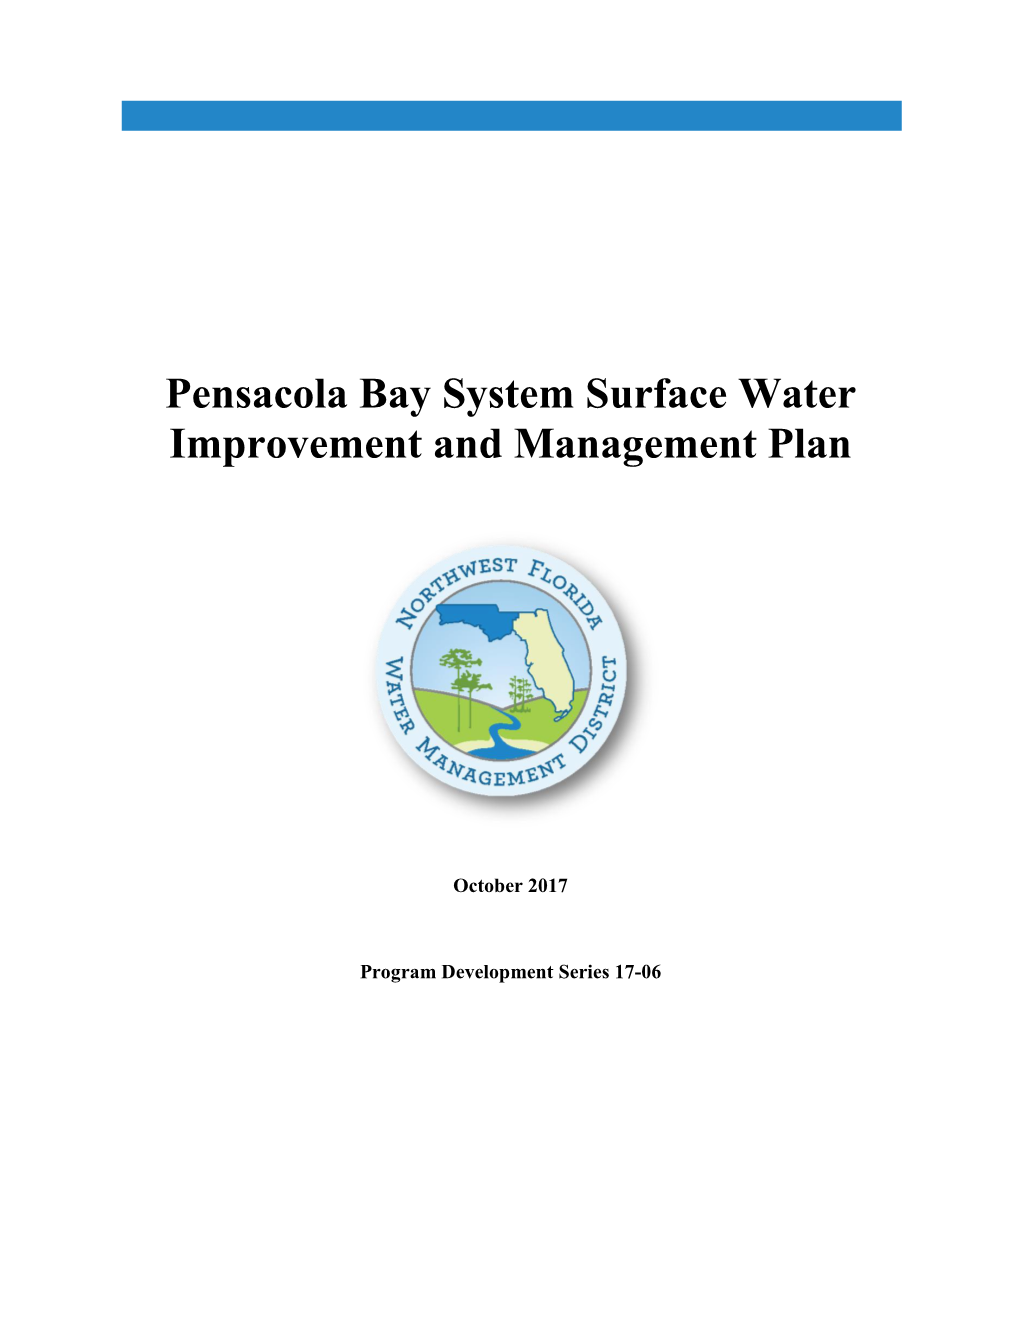 Pensacola Bay System Surface Water Improvement and Management Plan